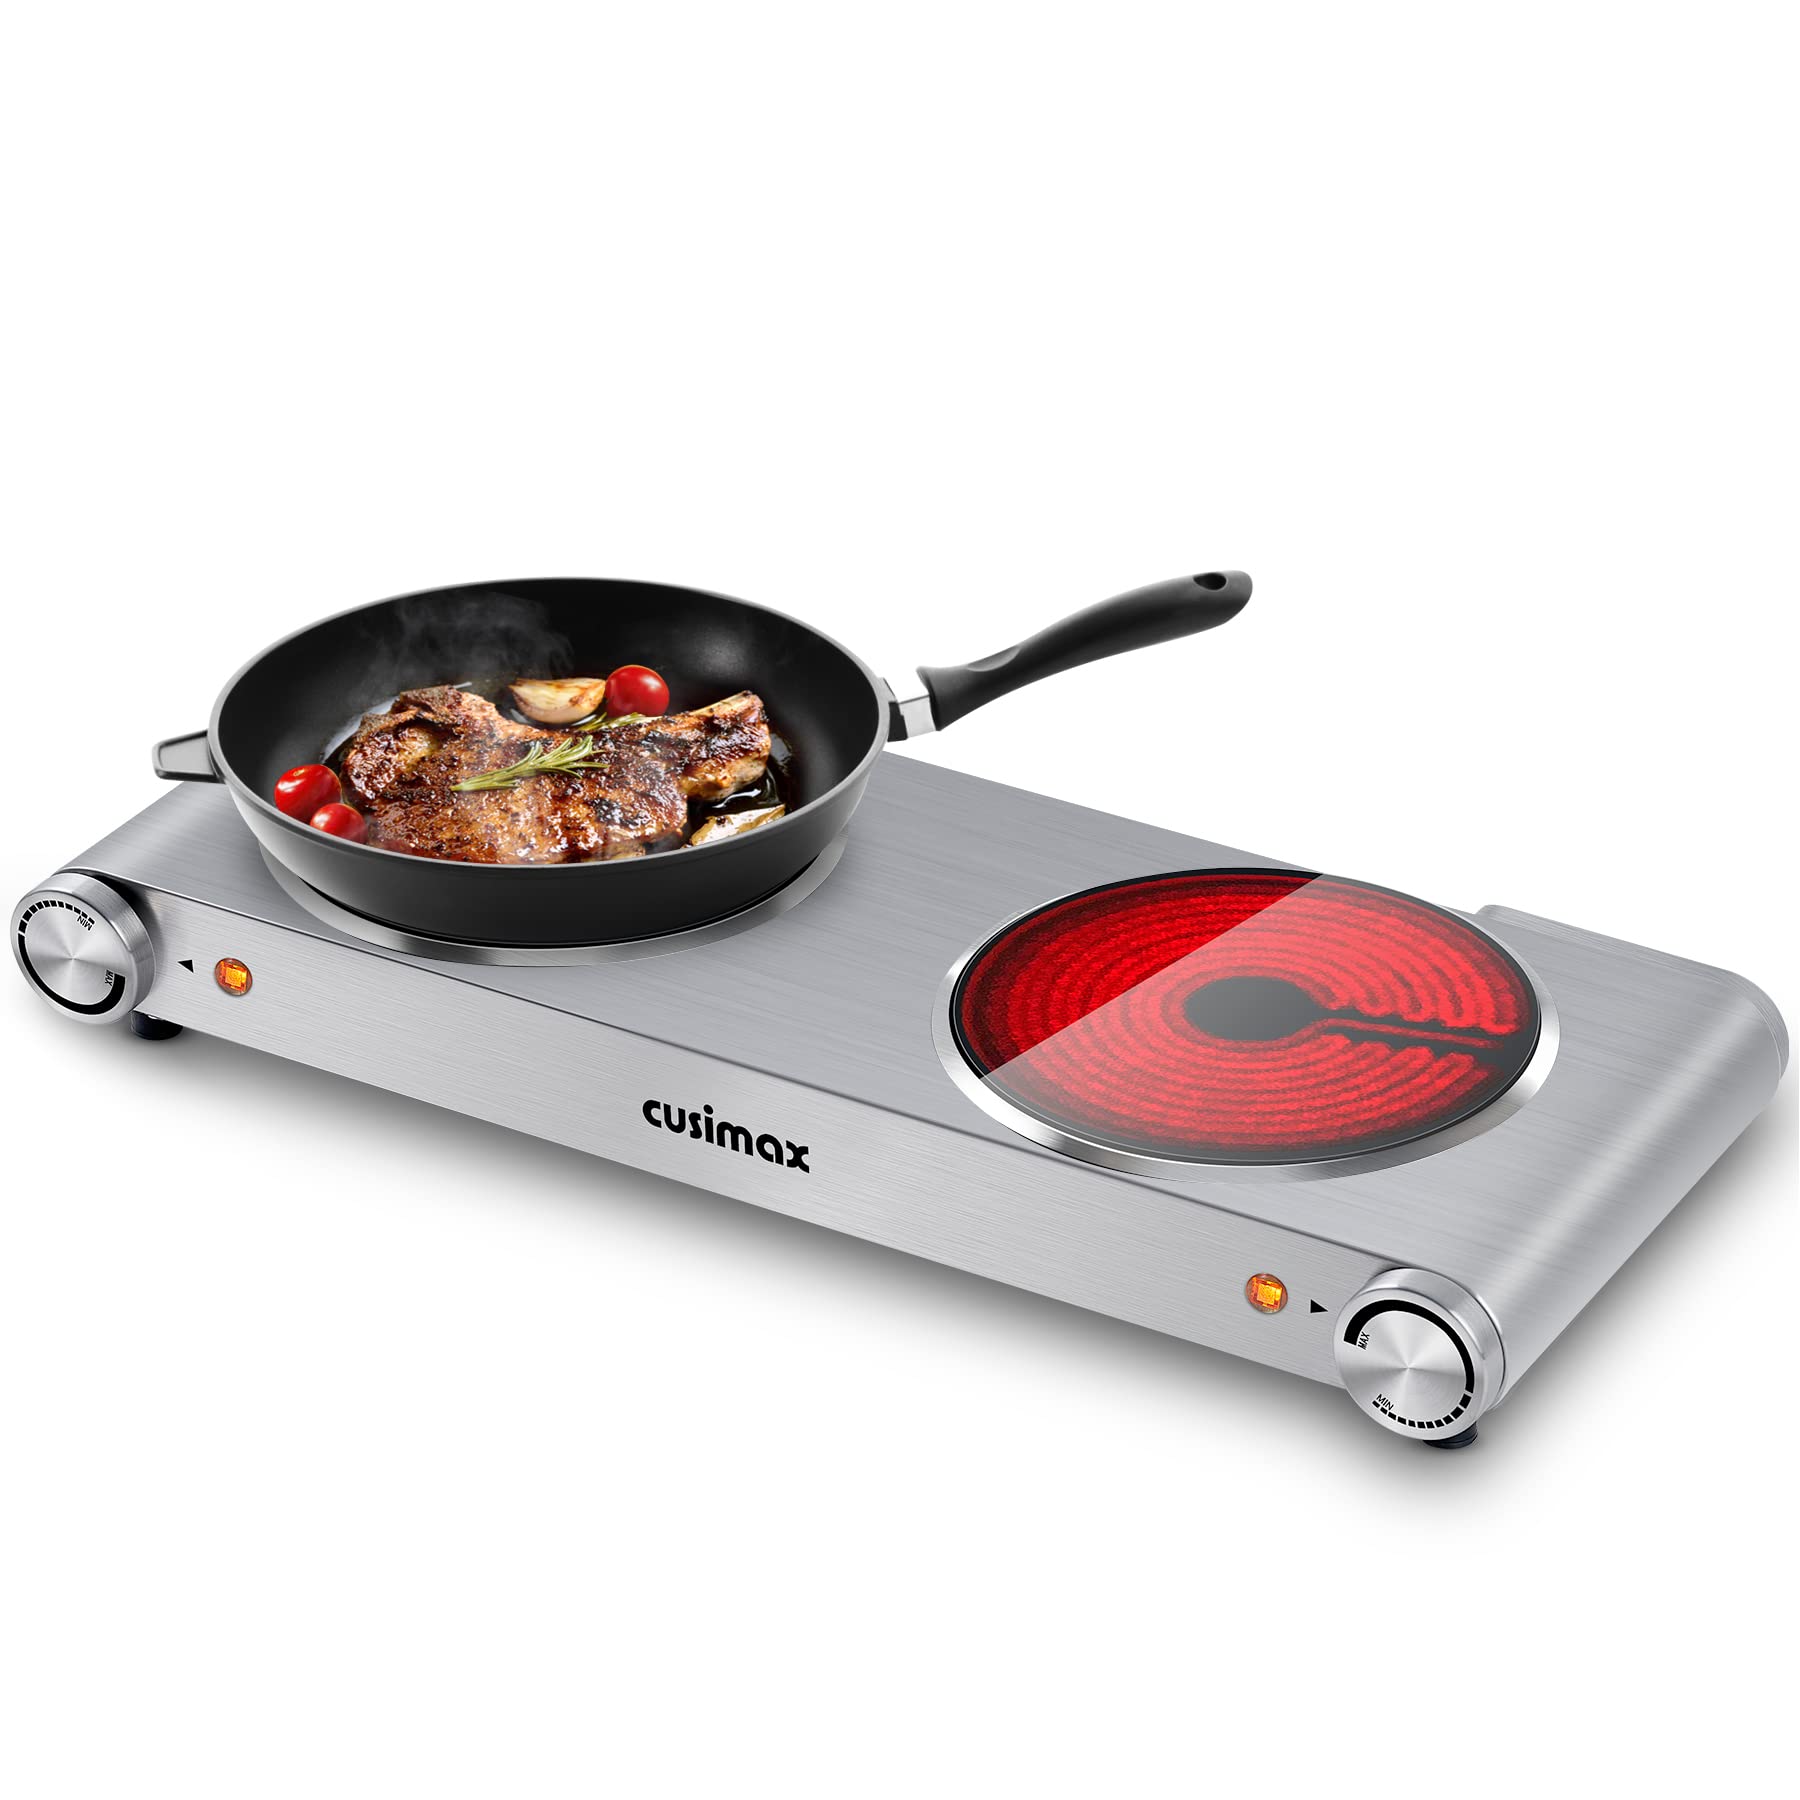 Cusimax 1800W Ceramic Hot Plate Cooktop,Electric Stove Double Burner with 2  Knob Comtrol